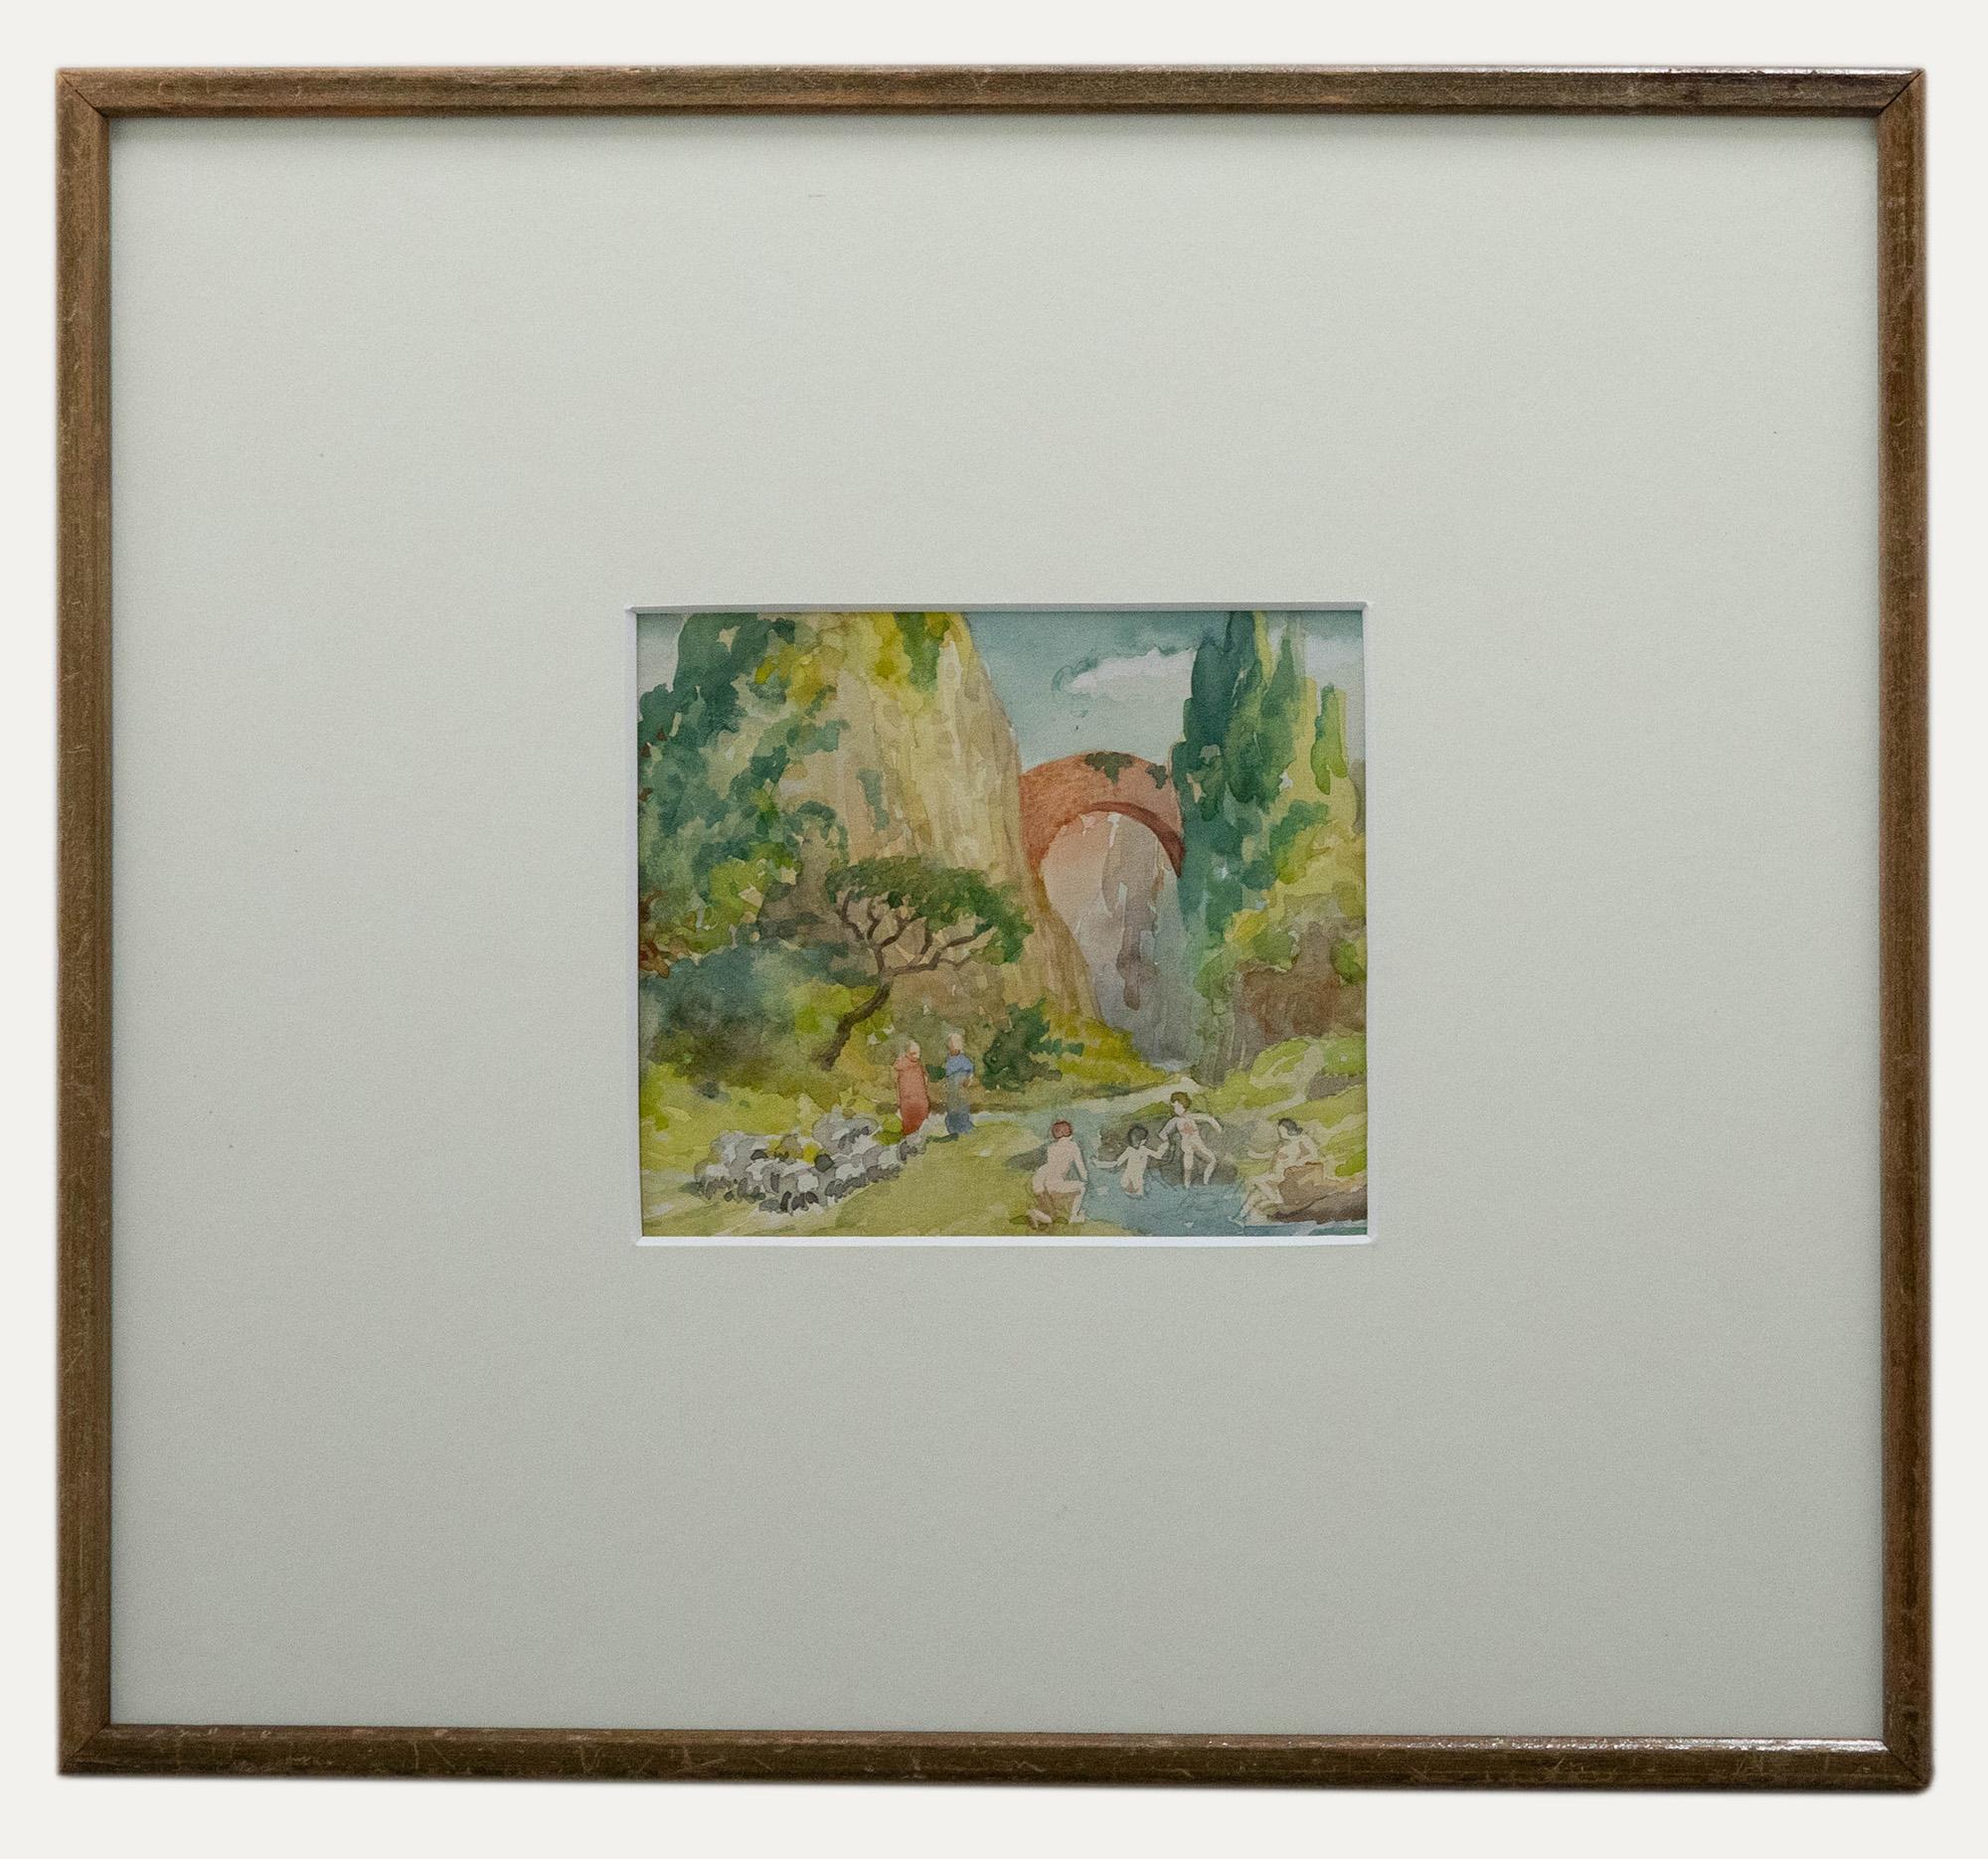 A fantastical watercolour by the artist Vivian Bewick, depicting a group of nude figures playing in a river landscape, with a flock of sheep nearby and a distant bridge between mountains. Handsomely presented in a vintage thin wooden frame and wide